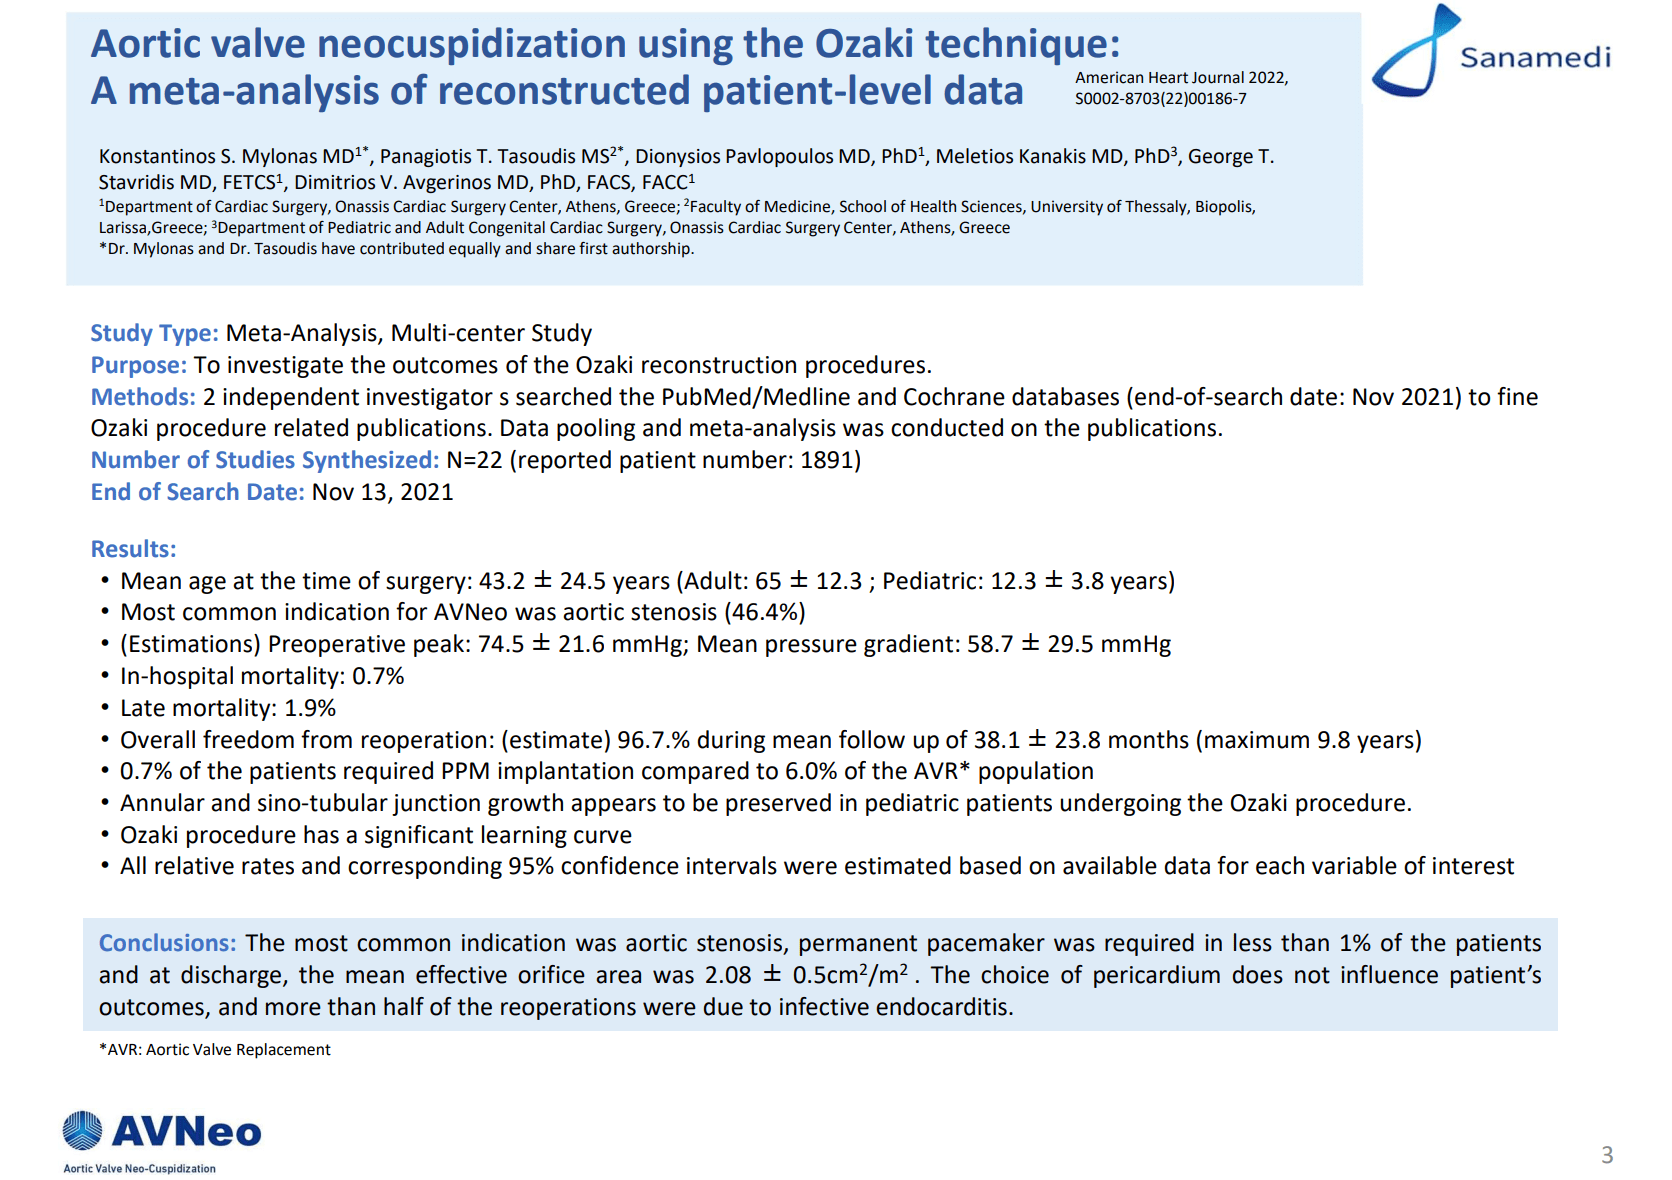 Summary of publication about aortic valve replacement using the Ozaki technique.